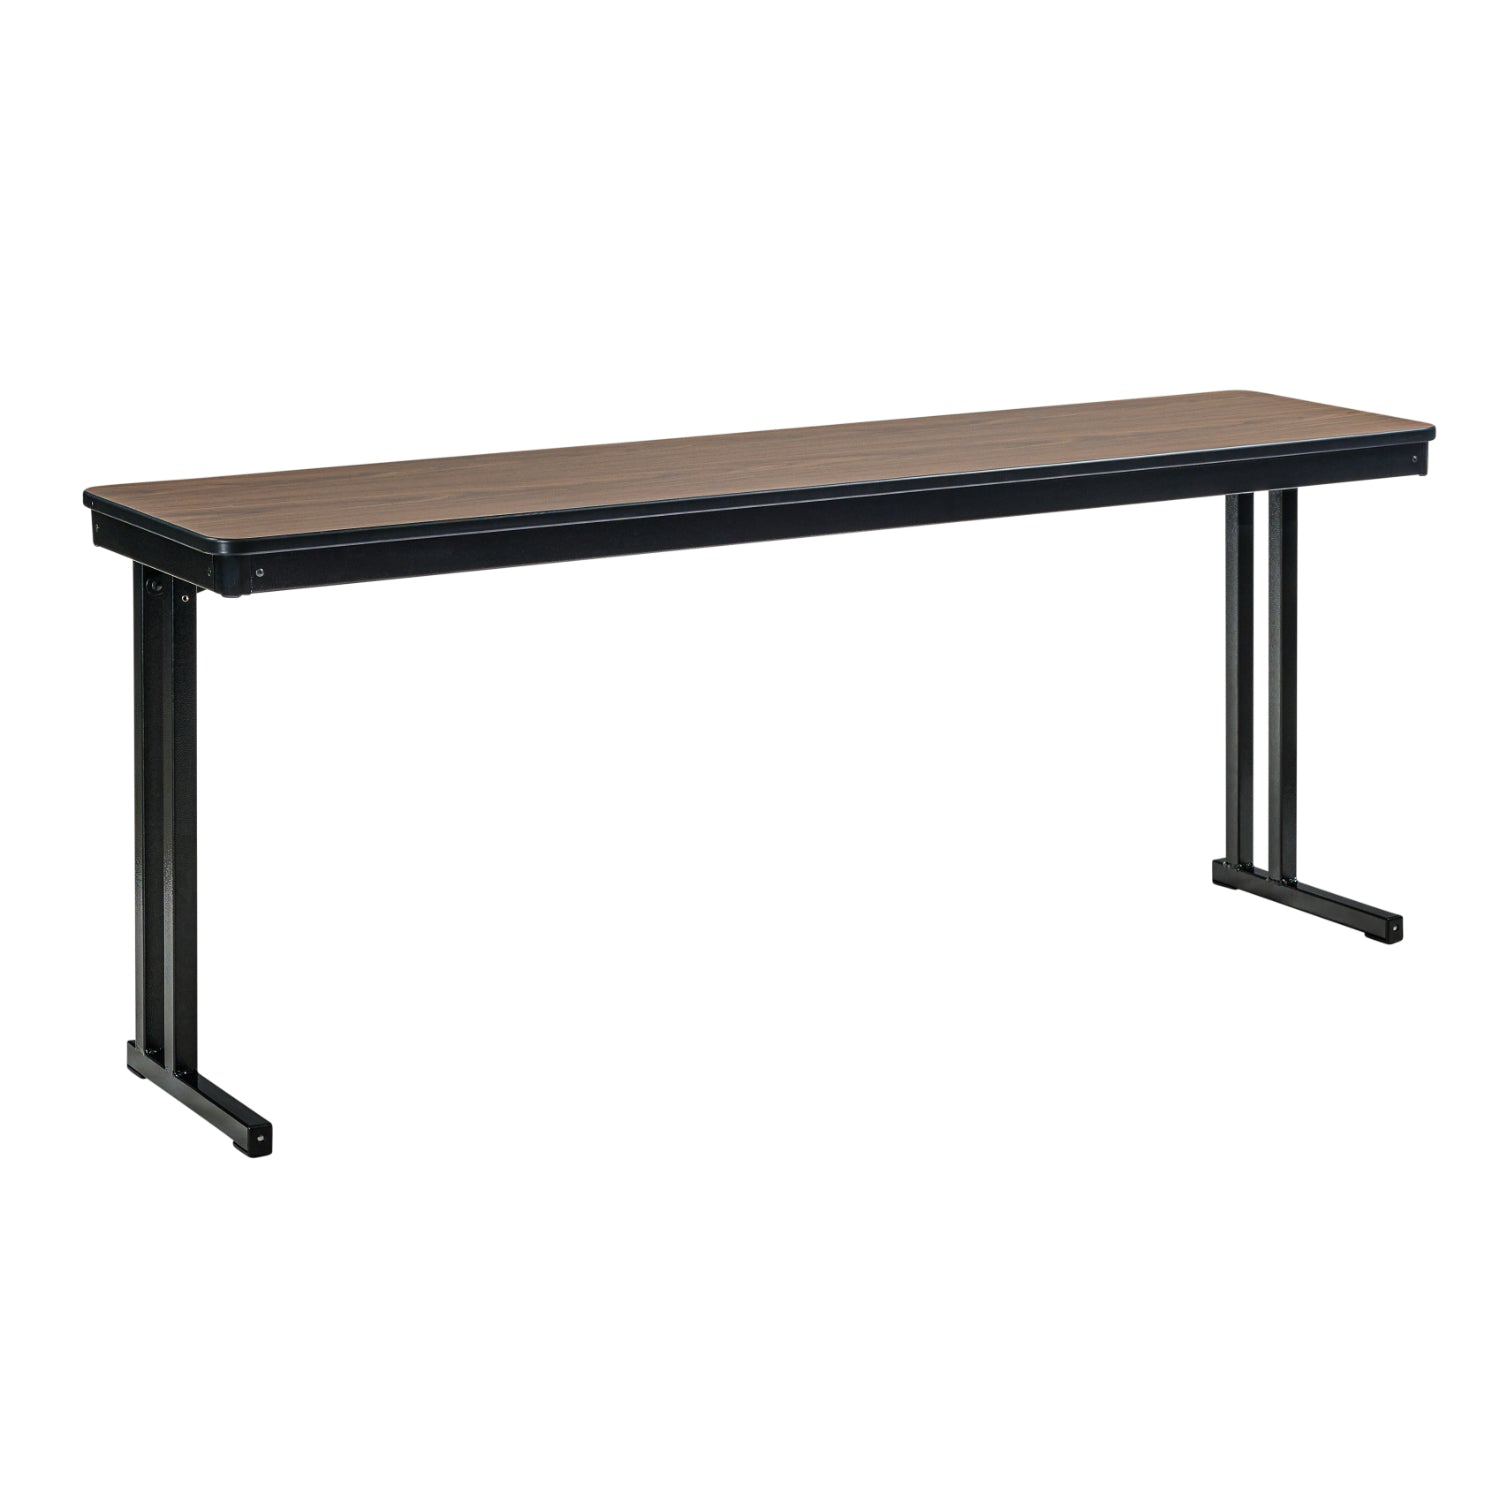 Max Seating Folding Training and Seminar Table with Cantilever Legs, 24" x 48", High Pressure Laminate Top with MDF Core/ProtectEdge